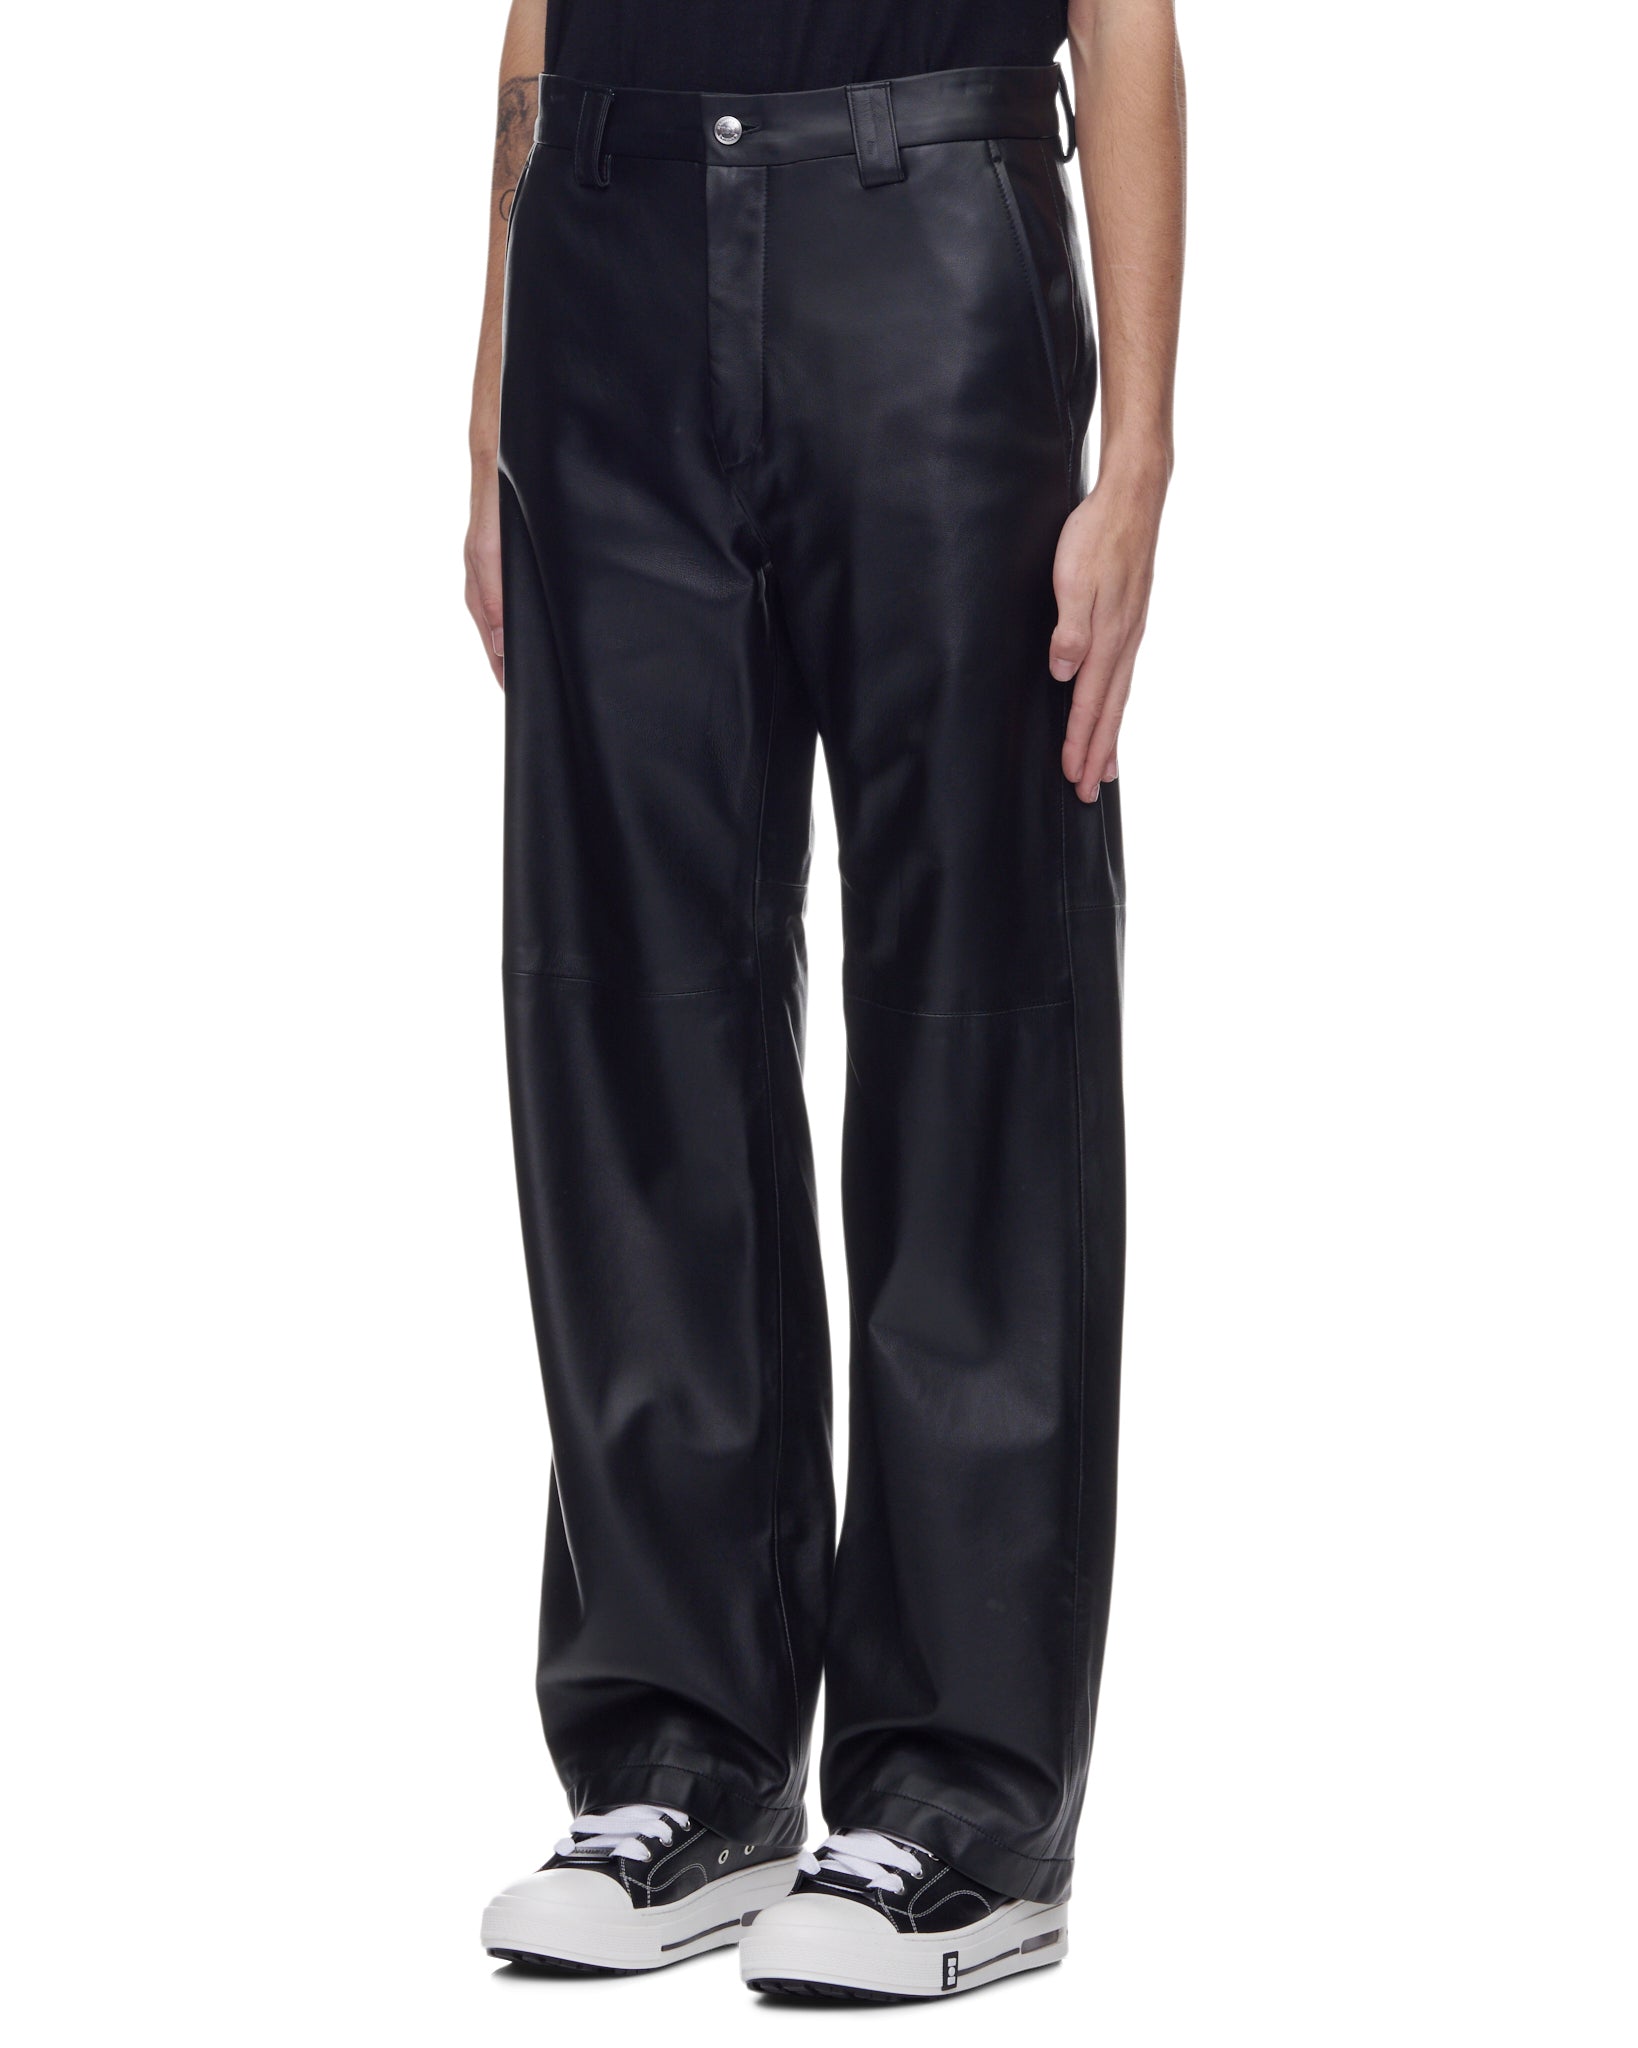 Leather Worker Pant